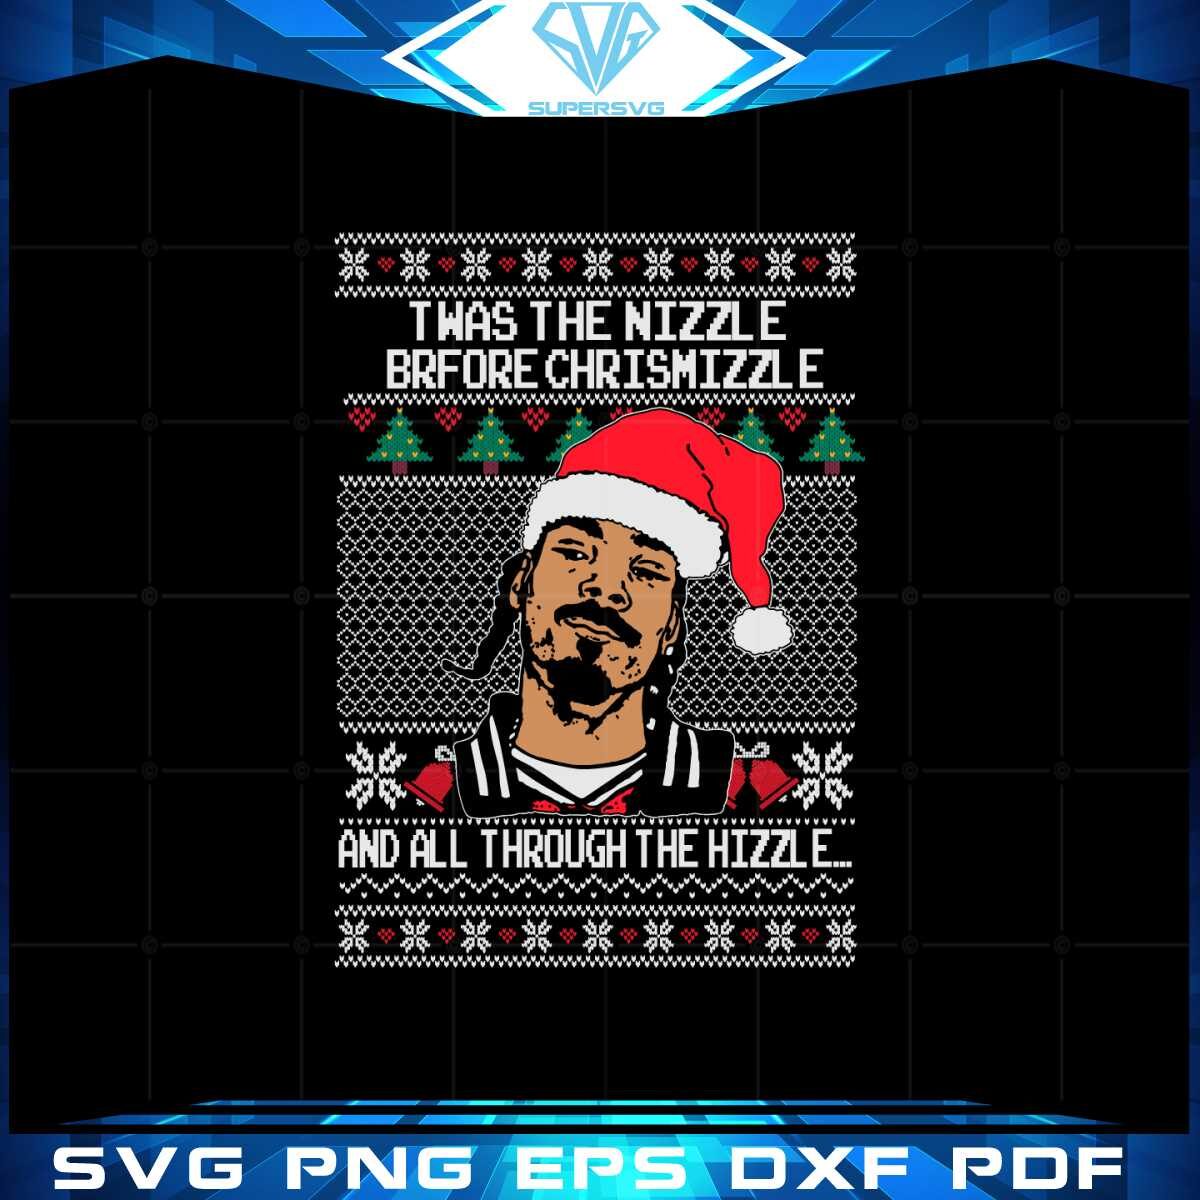 ugly-christmas-sweater-snoop-dogg-twas-the-nizzle-before-chrismizzle-svg